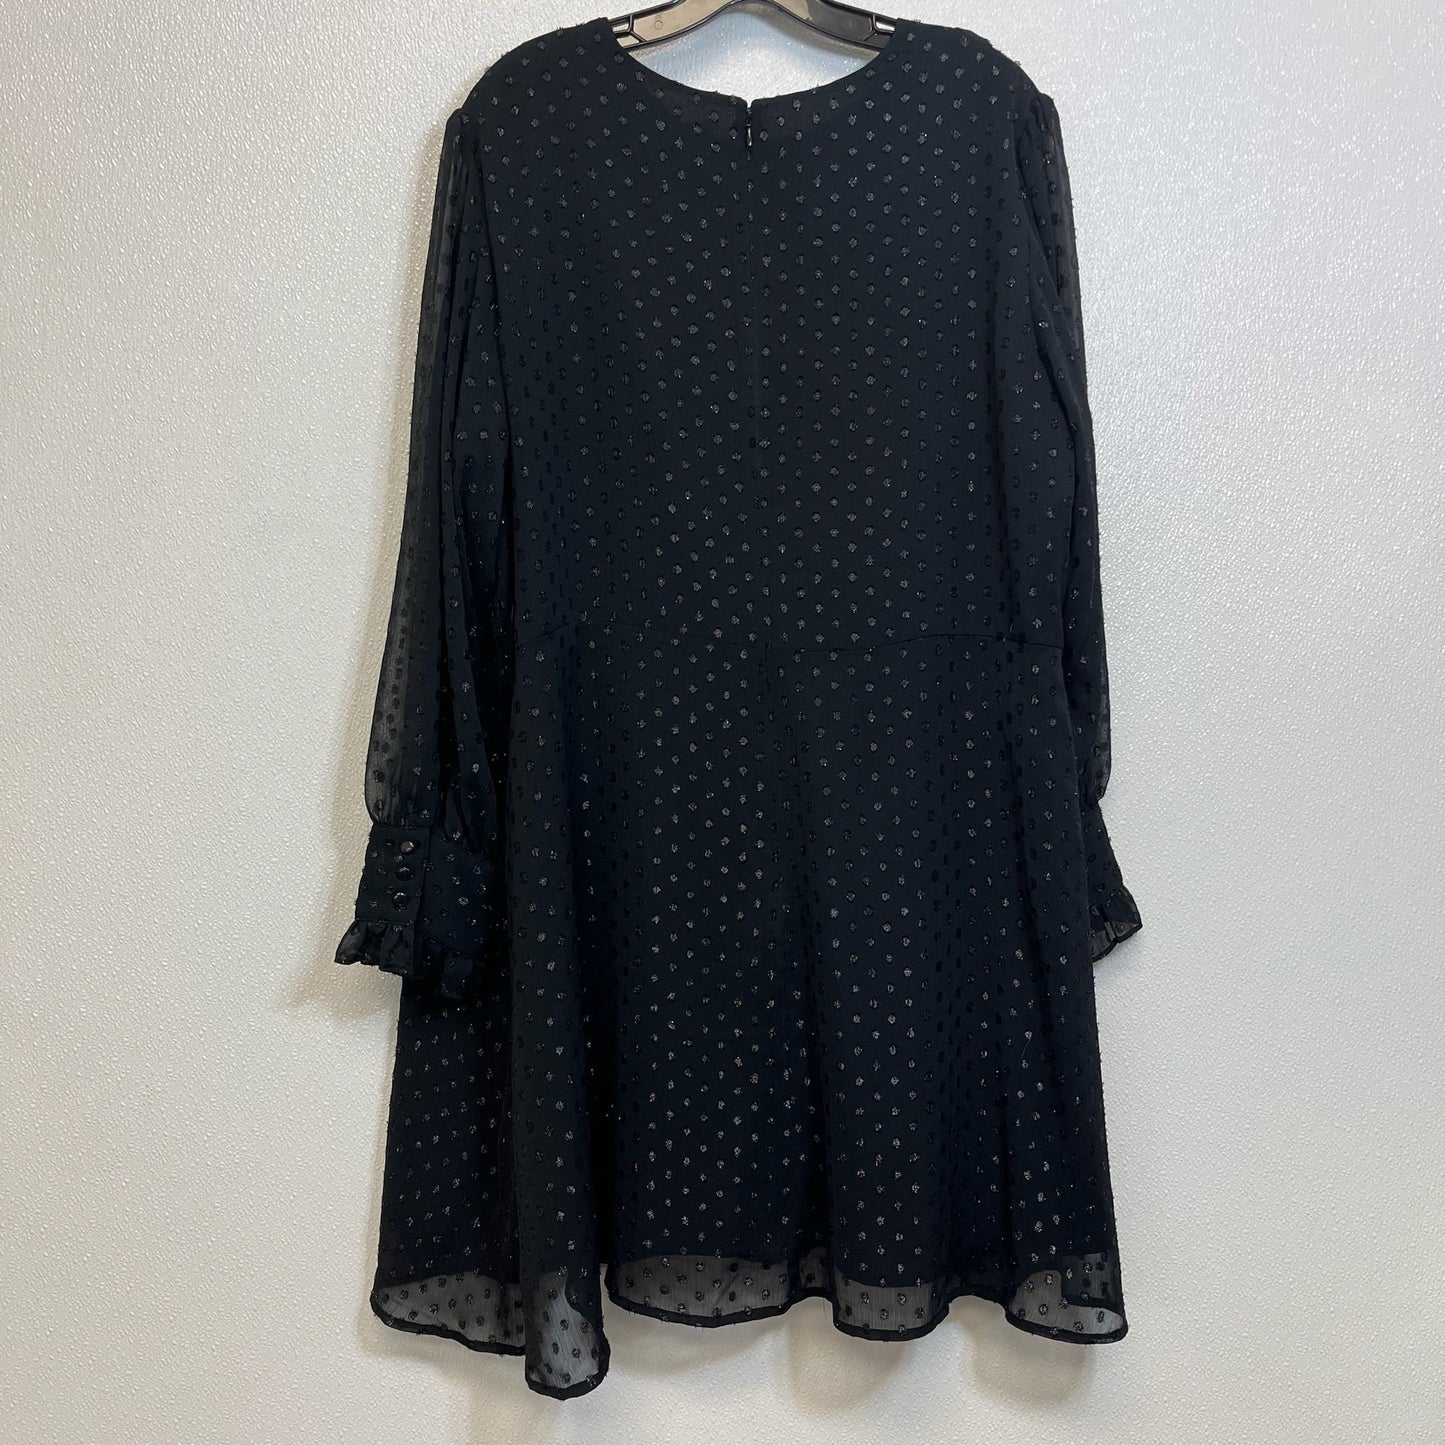 Black Dress Casual Short A New Day, Size 2x